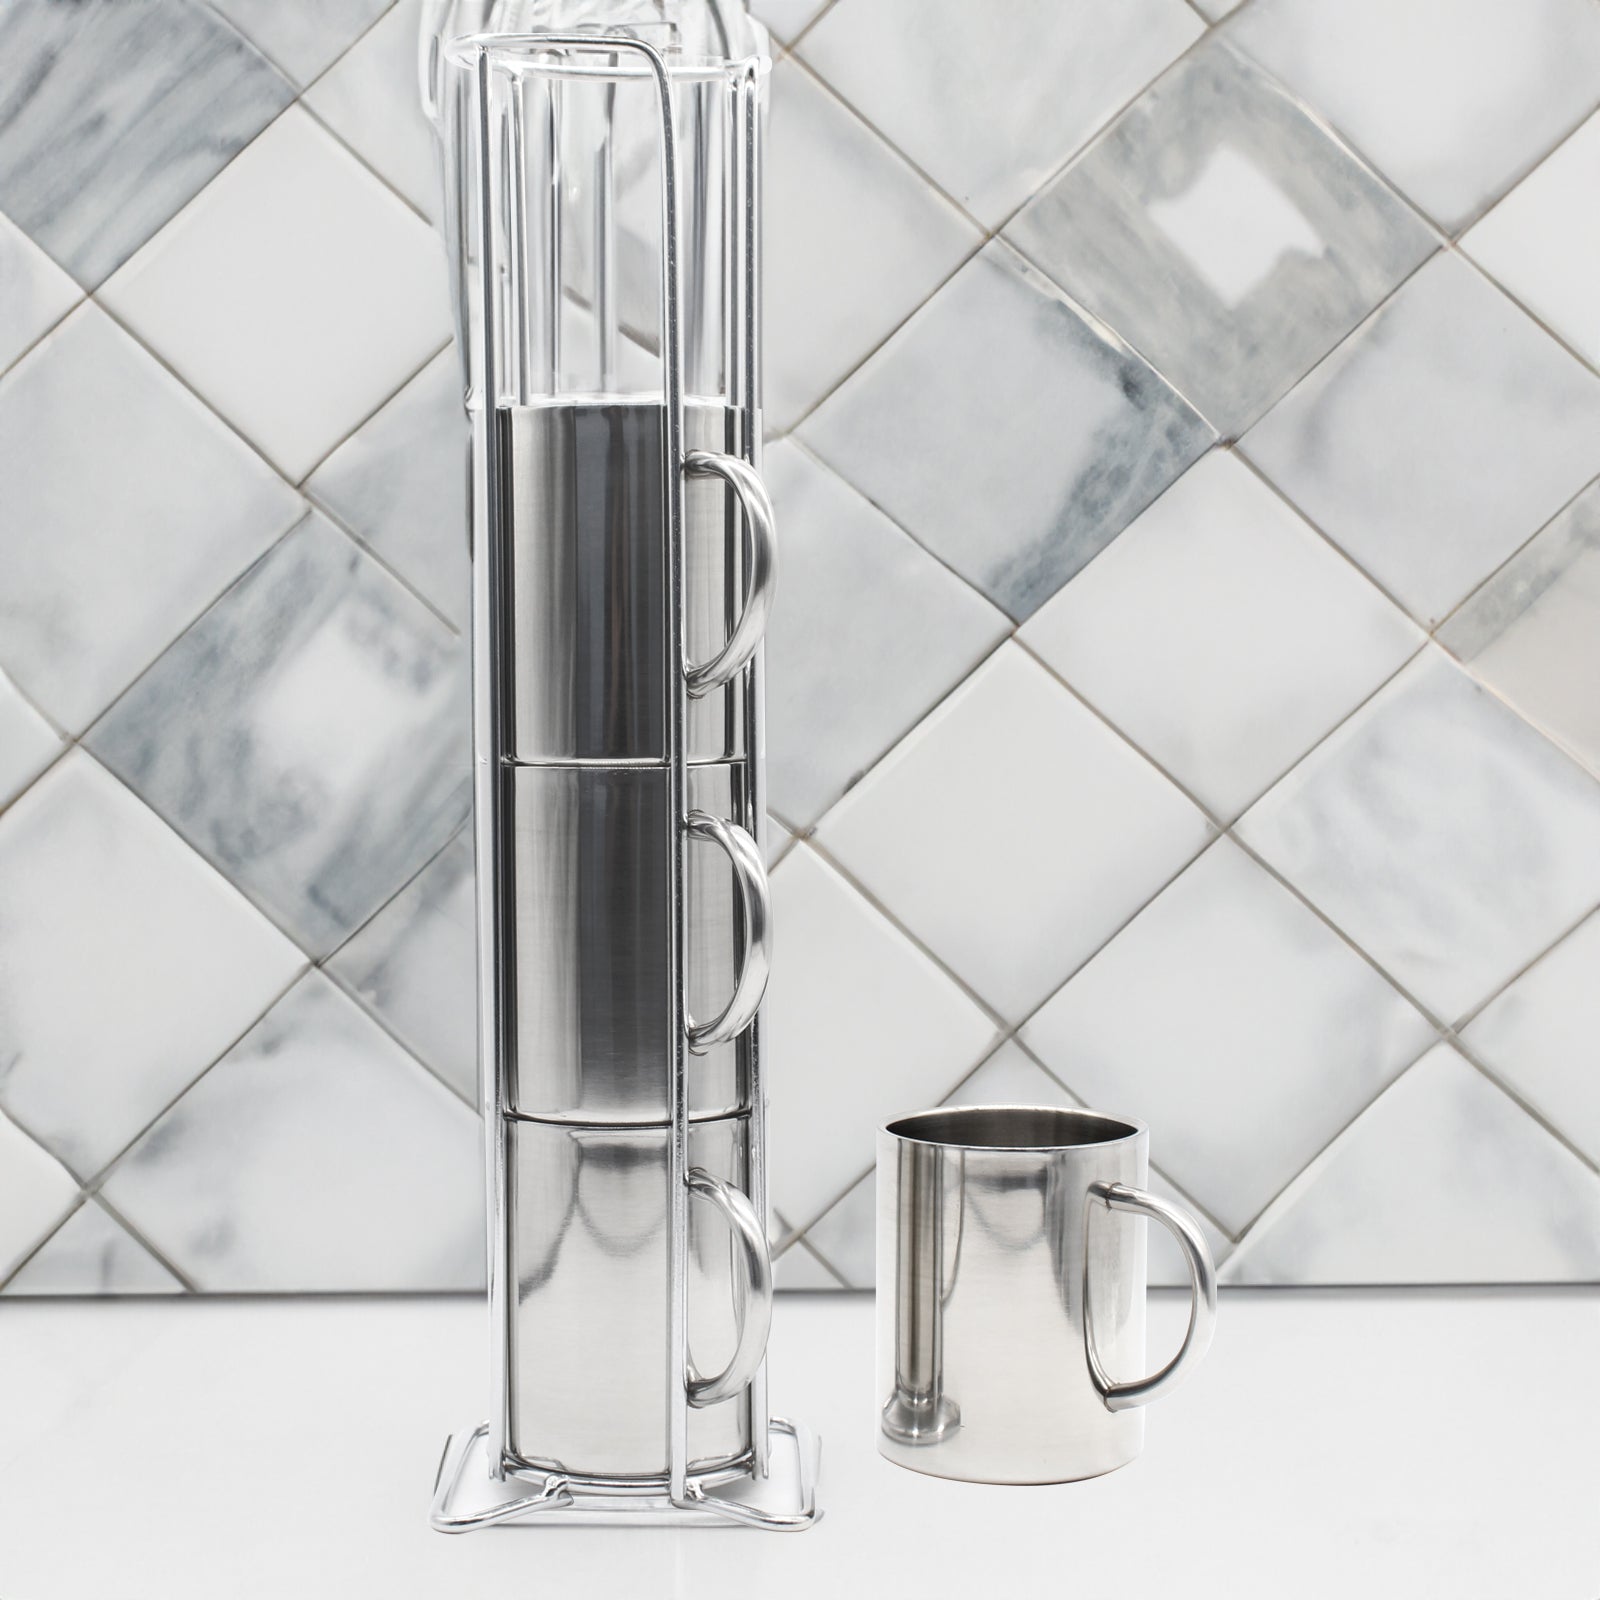 Stainless Steel Mugs in Tower on Kitchen Side